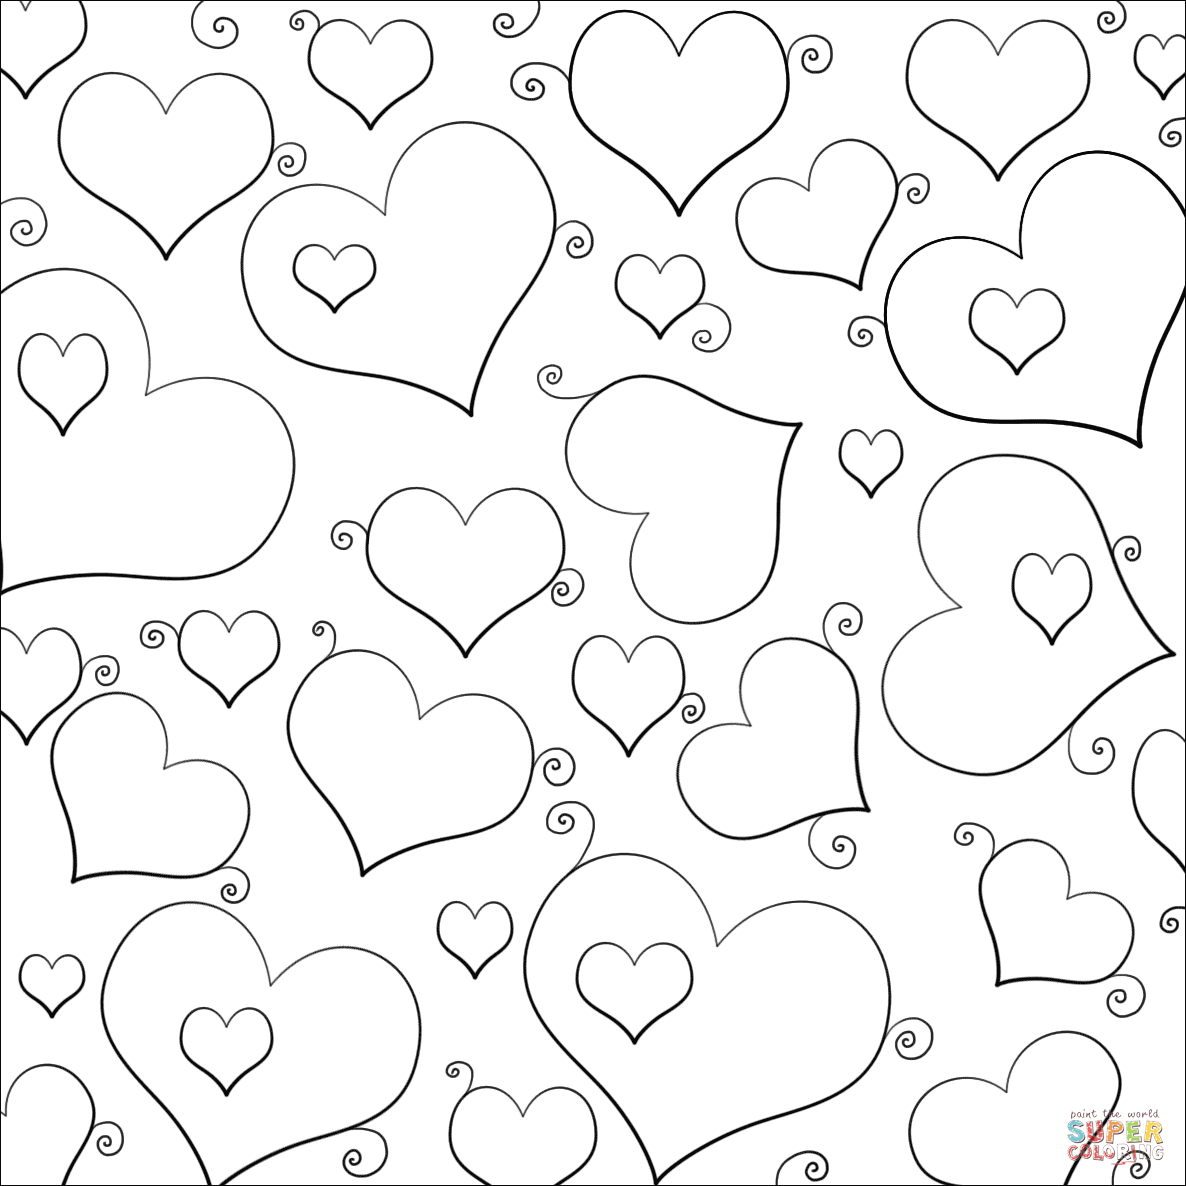 Lots of Hearts coloring page | Free Printable Coloring Pages